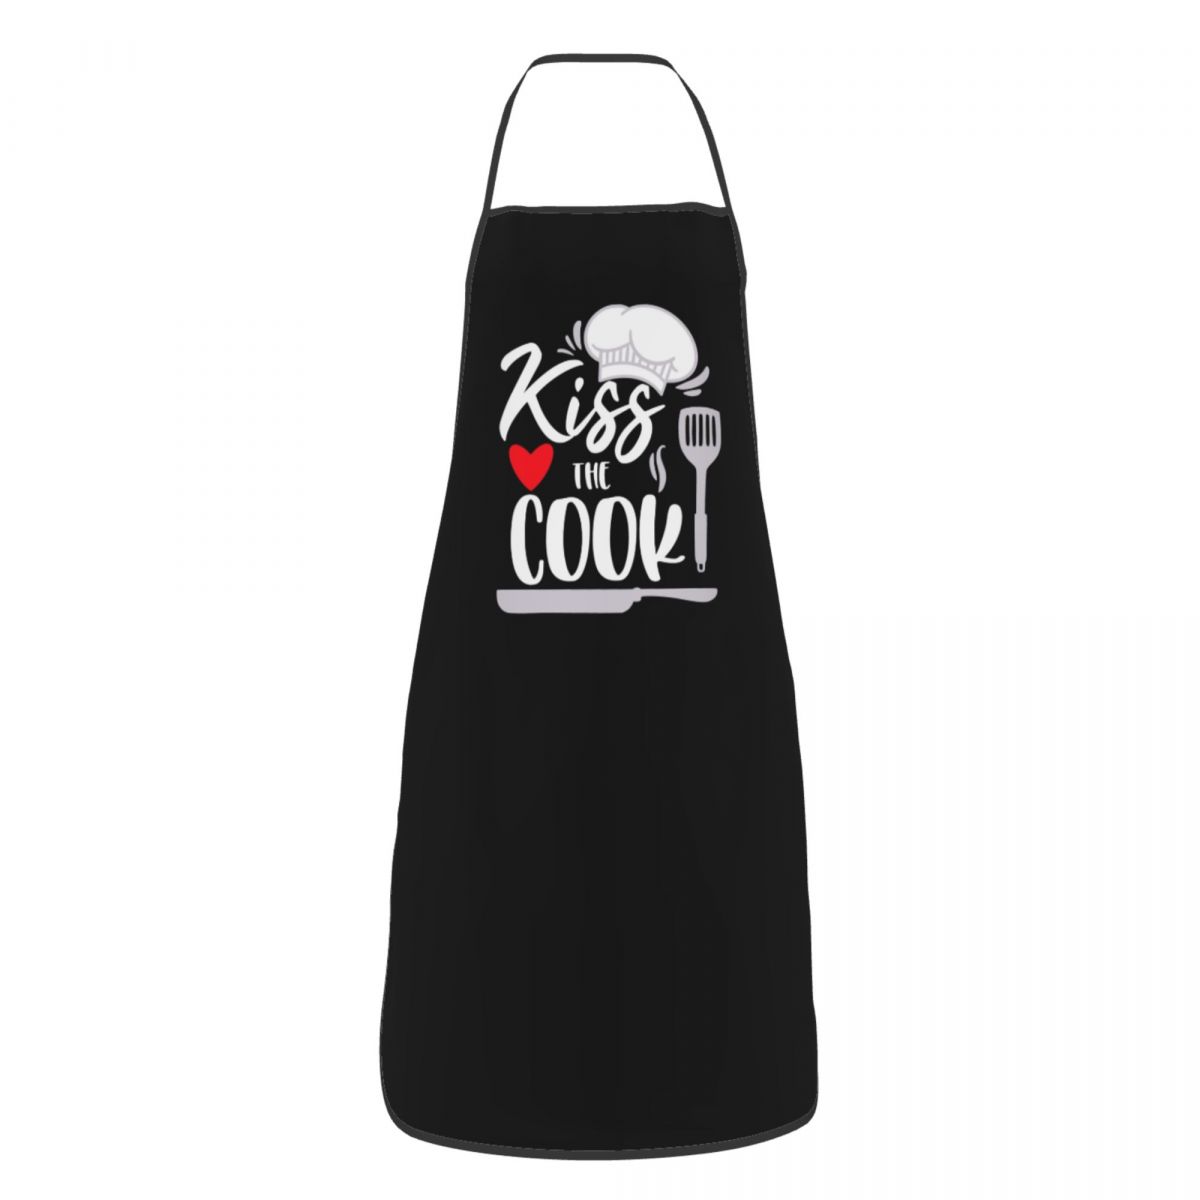 Funny apron kiss the cook